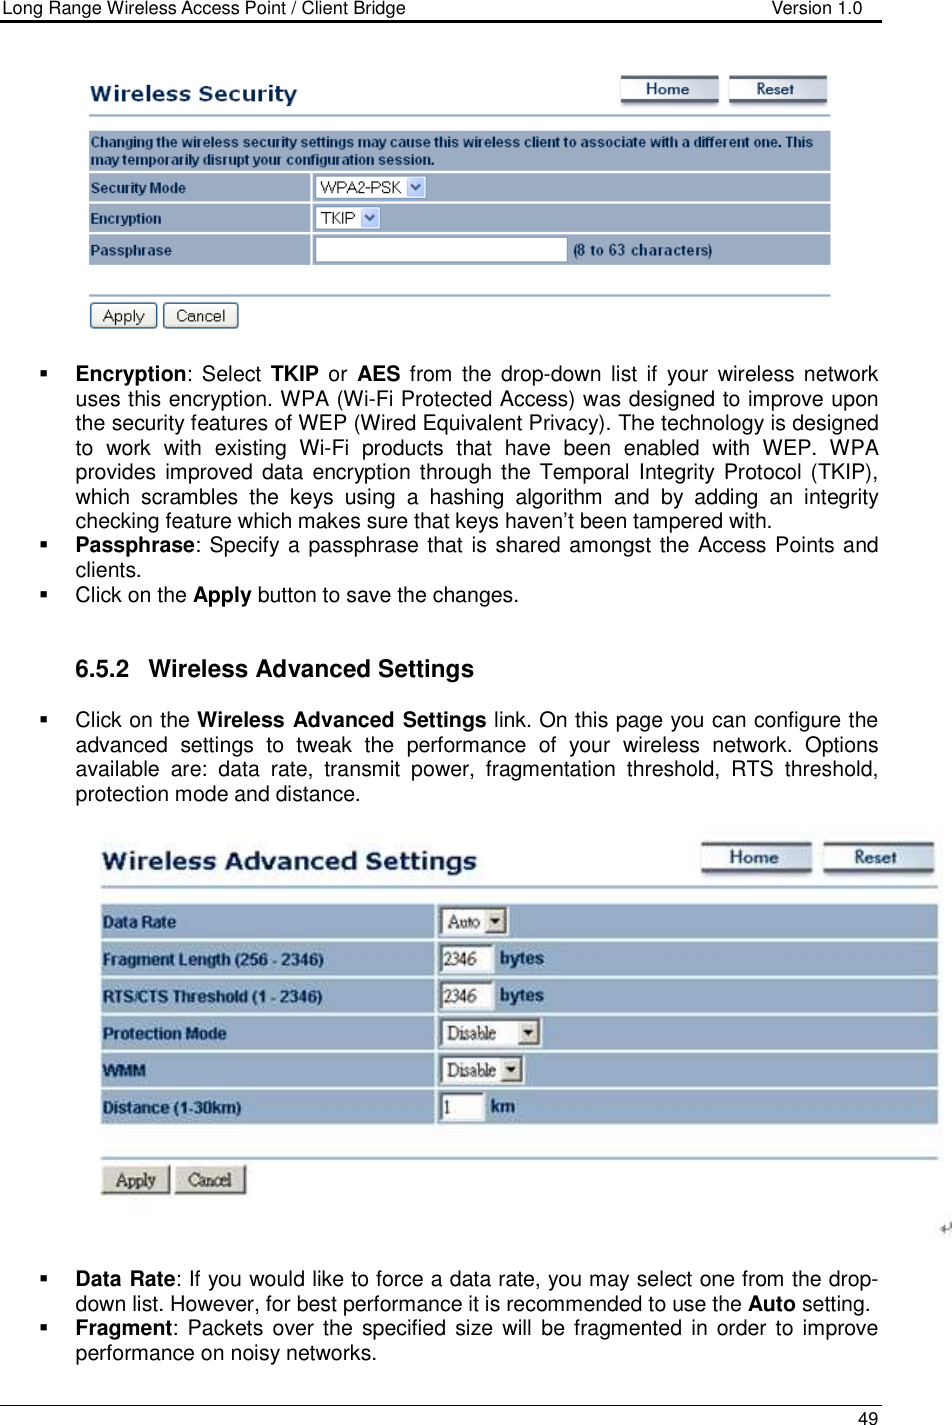 Long Range Wireless Access Point / Client Bridge                                   Version 1.0    49     Encryption:  Select  TKIP or  AES from the  drop-down  list  if  your  wireless  network uses this encryption. WPA (Wi-Fi Protected Access) was designed to improve upon the security features of WEP (Wired Equivalent Privacy). The technology is designed to  work  with  existing  Wi-Fi  products  that  have  been  enabled  with  WEP.  WPA provides improved data encryption through the Temporal Integrity Protocol (TKIP), which  scrambles  the  keys  using  a  hashing  algorithm  and  by  adding  an  integrity checking feature which makes sure that keys haven’t been tampered with.   Passphrase: Specify a passphrase that is shared amongst the Access Points and clients.    Click on the Apply button to save the changes.    6.5.2  Wireless Advanced Settings   Click on the Wireless Advanced Settings link. On this page you can configure the advanced  settings  to  tweak  the  performance  of  your  wireless  network.  Options available  are:  data  rate,  transmit  power,  fragmentation  threshold,  RTS  threshold, protection mode and distance.      Data Rate: If you would like to force a data rate, you may select one from the drop-down list. However, for best performance it is recommended to use the Auto setting.   Fragment:  Packets  over  the  specified  size will  be fragmented  in  order  to improve performance on noisy networks. 